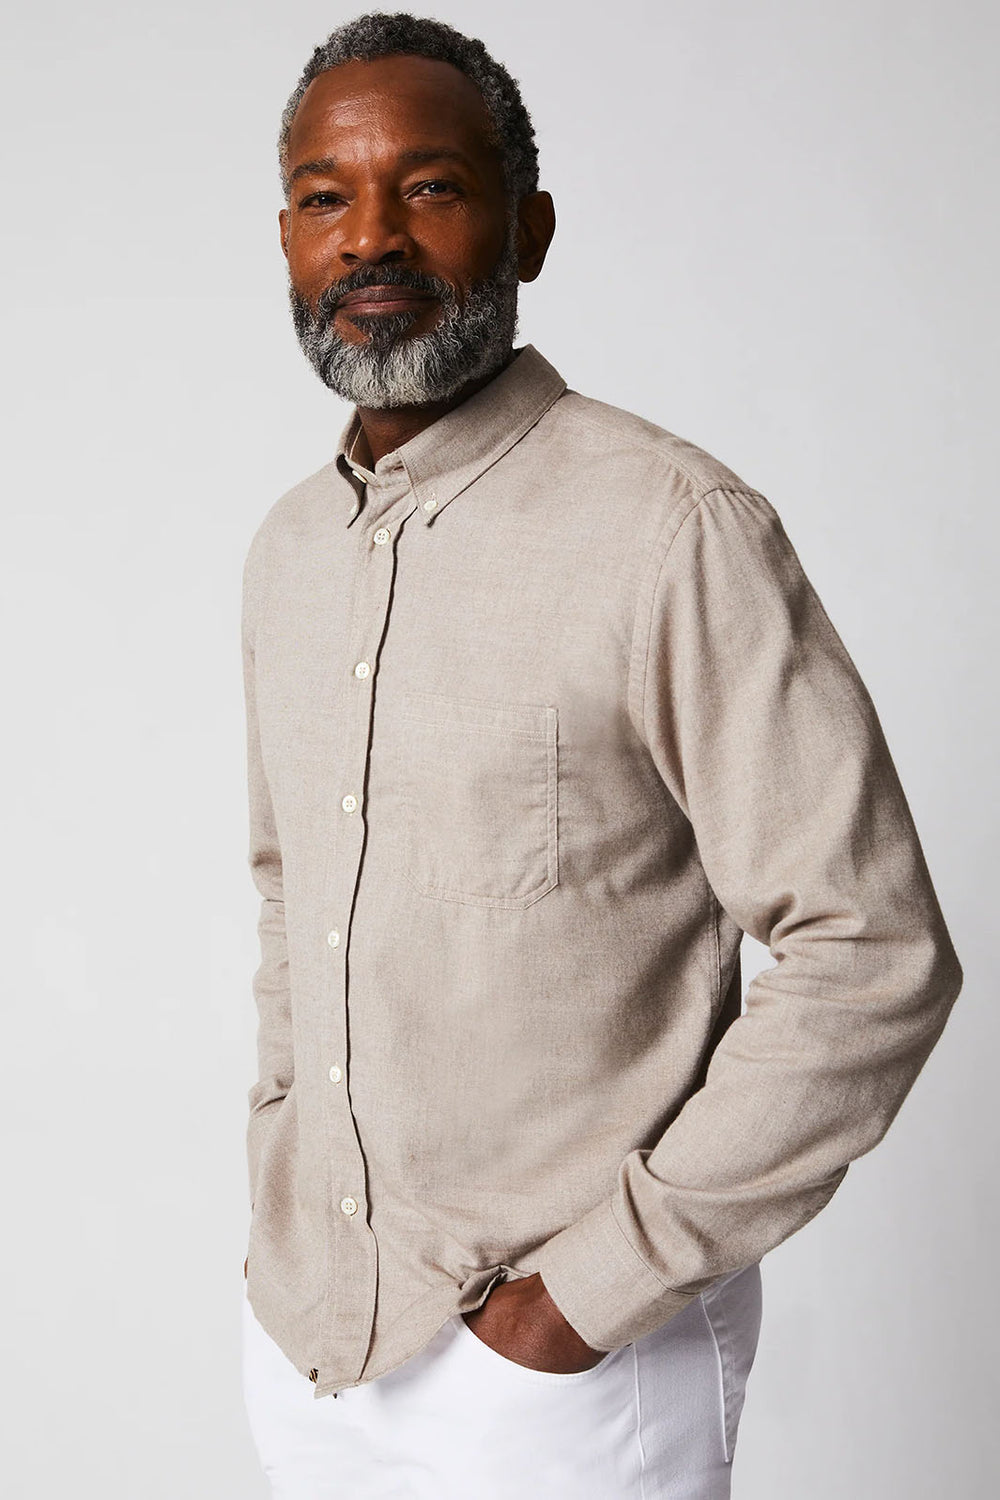 Man wearing a tan long sleeved button up